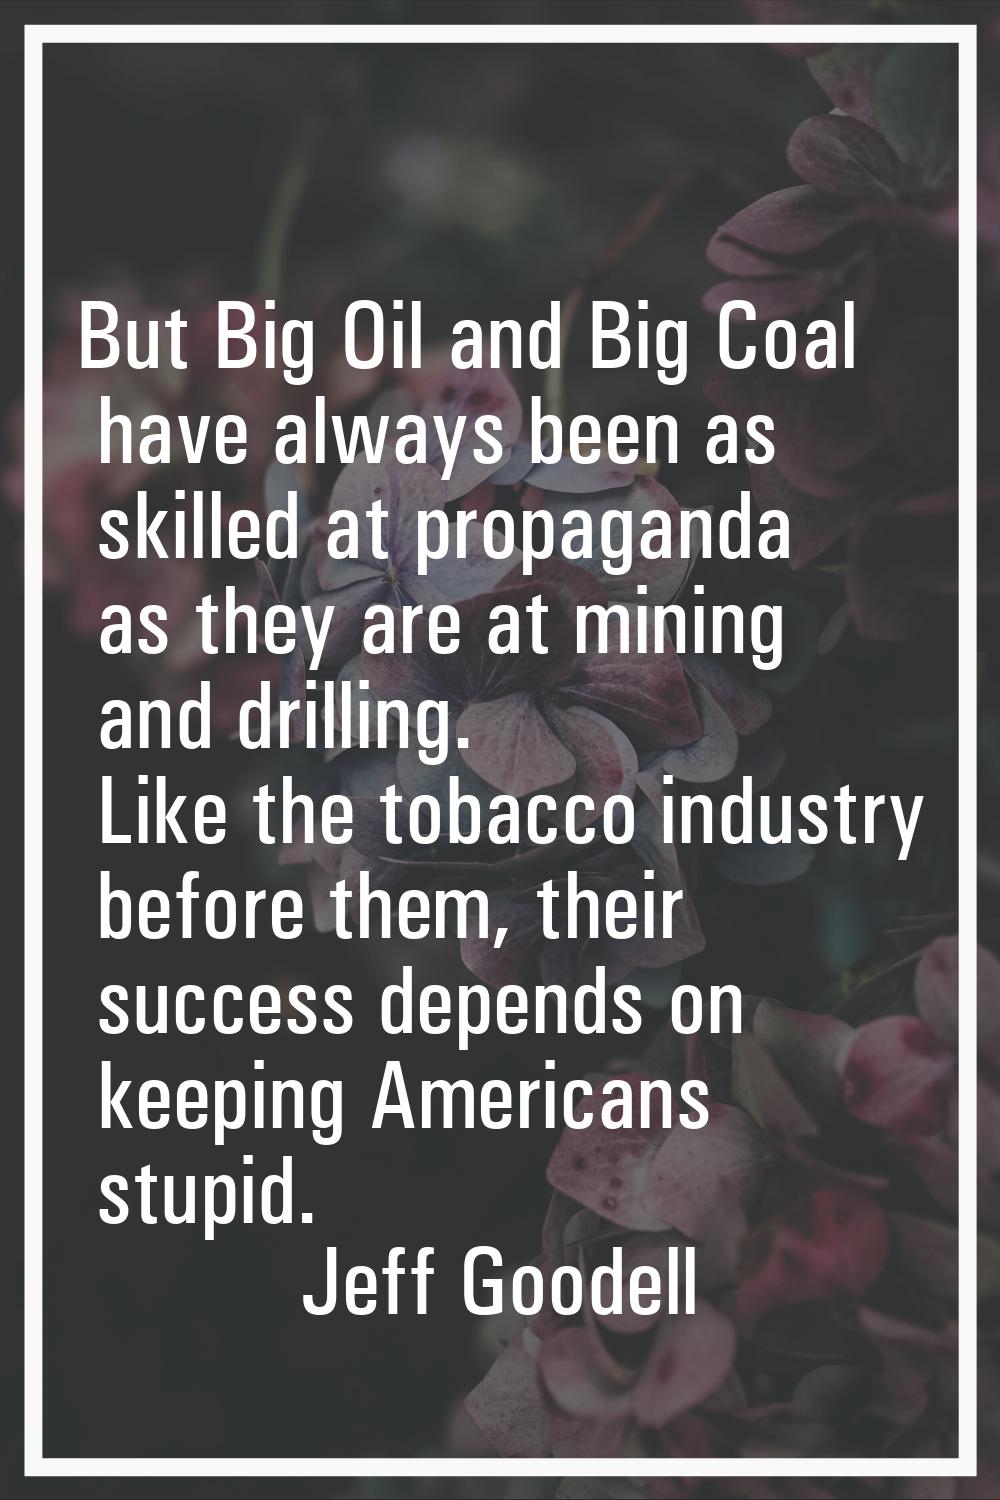 But Big Oil and Big Coal have always been as skilled at propaganda as they are at mining and drilli